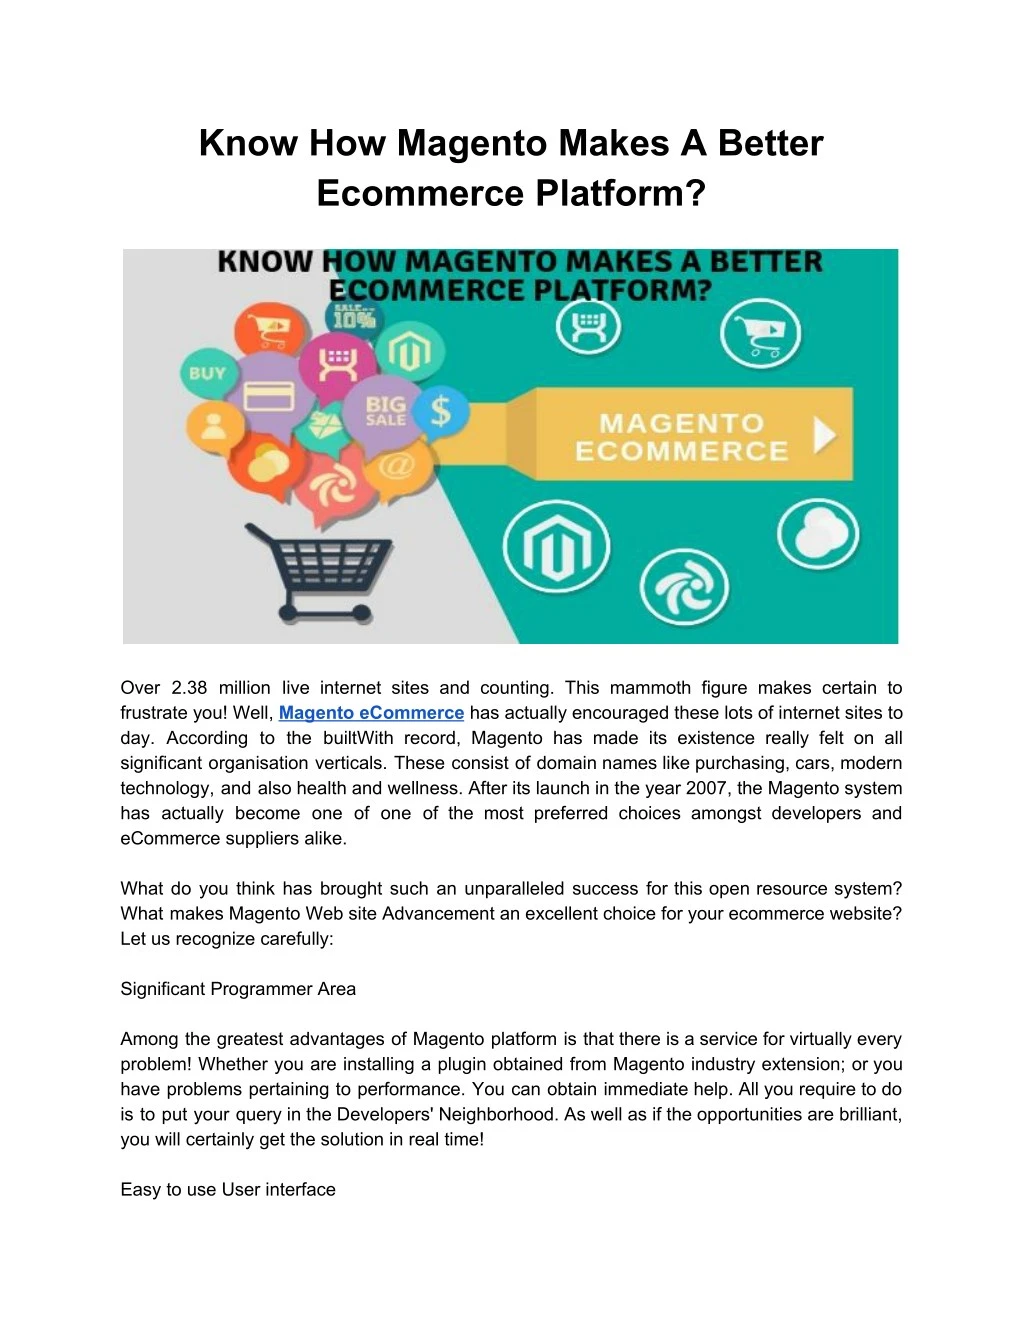 know how magento makes a better ecommerce platform